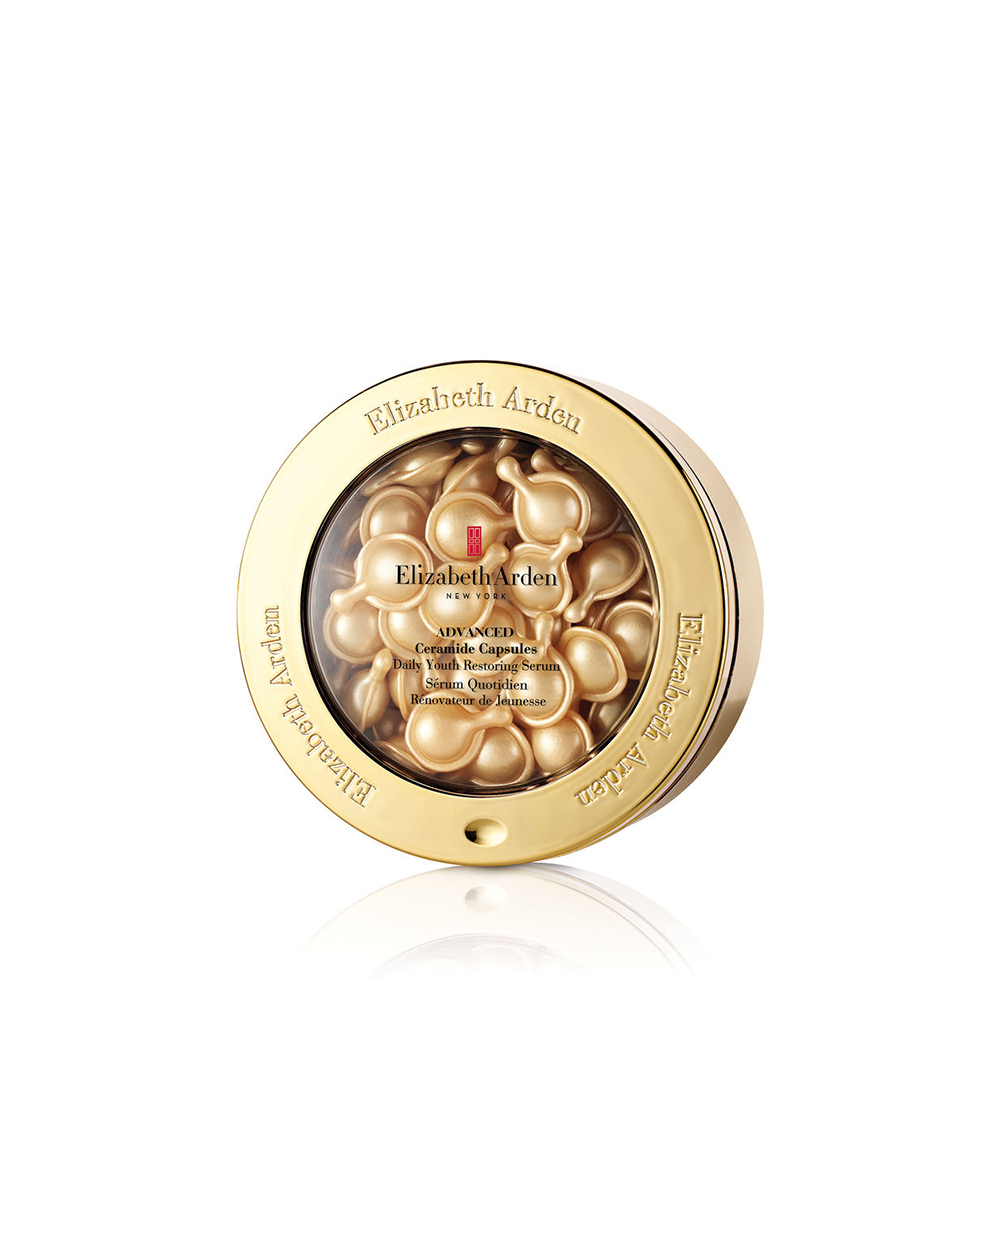 Elizabeth Arden Advanced Ceramide Capsules Daily Youth Restoring Serum from $112 from Farmers